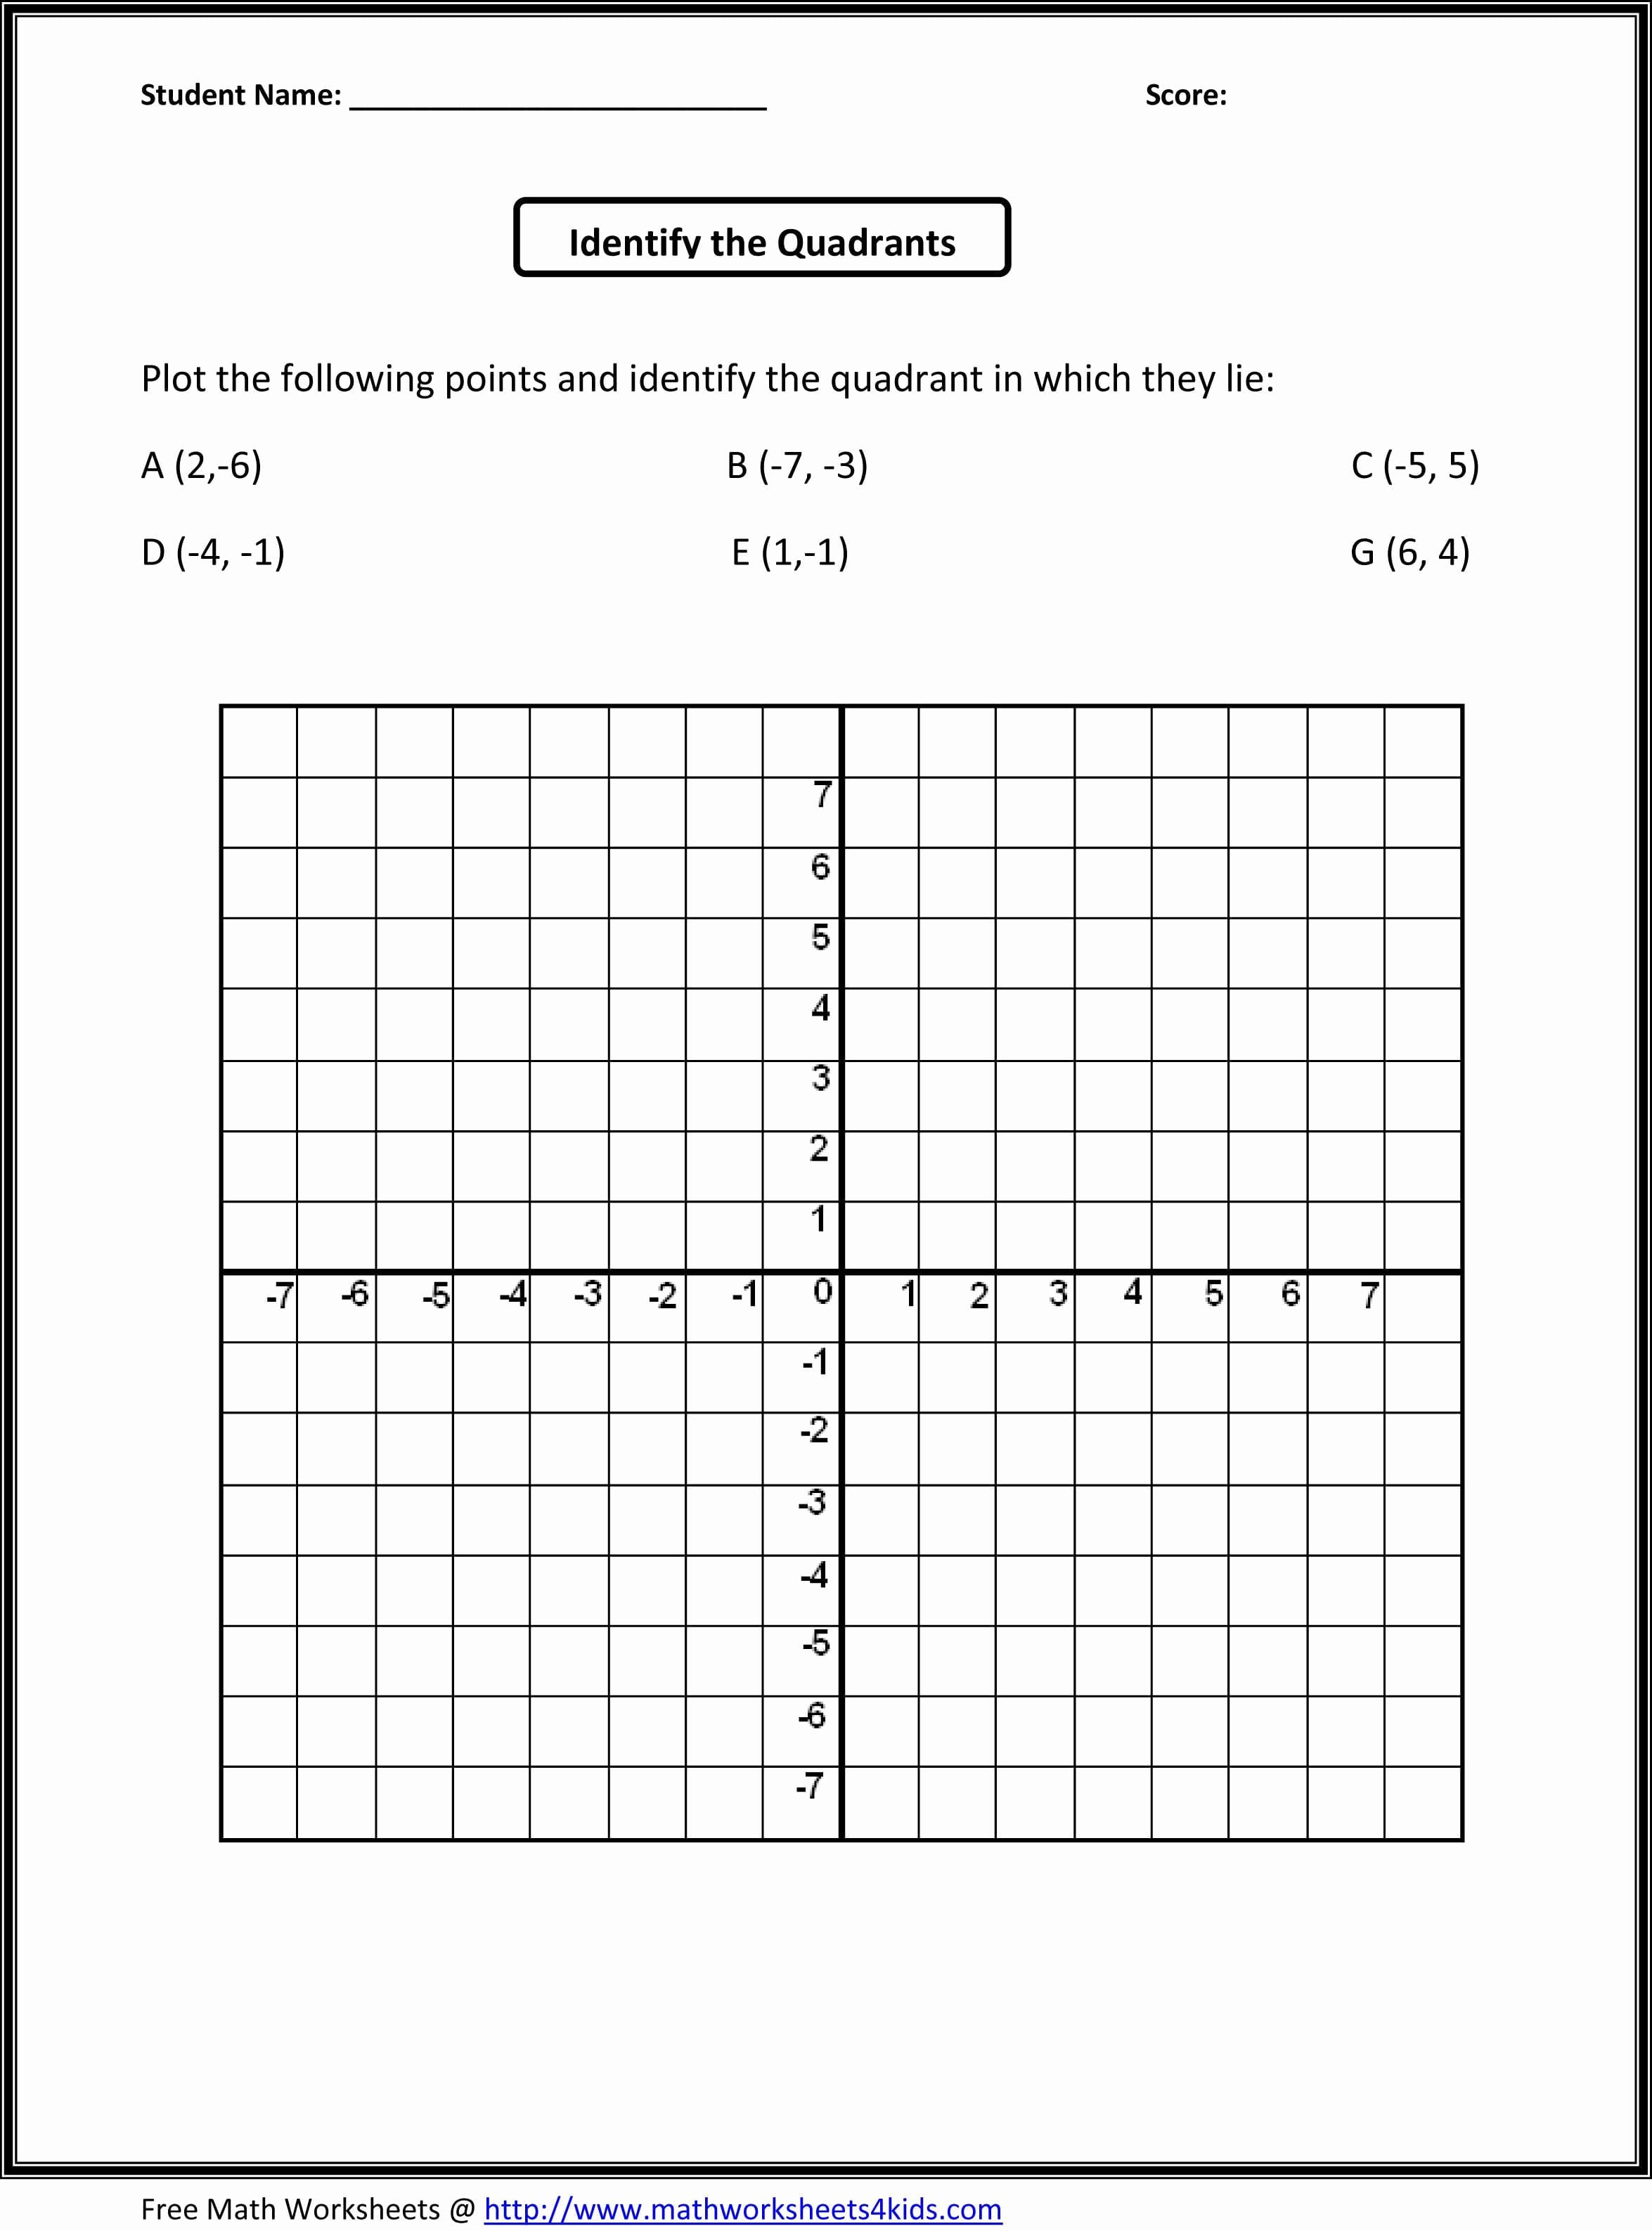 8th-grade-math-worksheets-with-answers-awesome-collection-db-excel